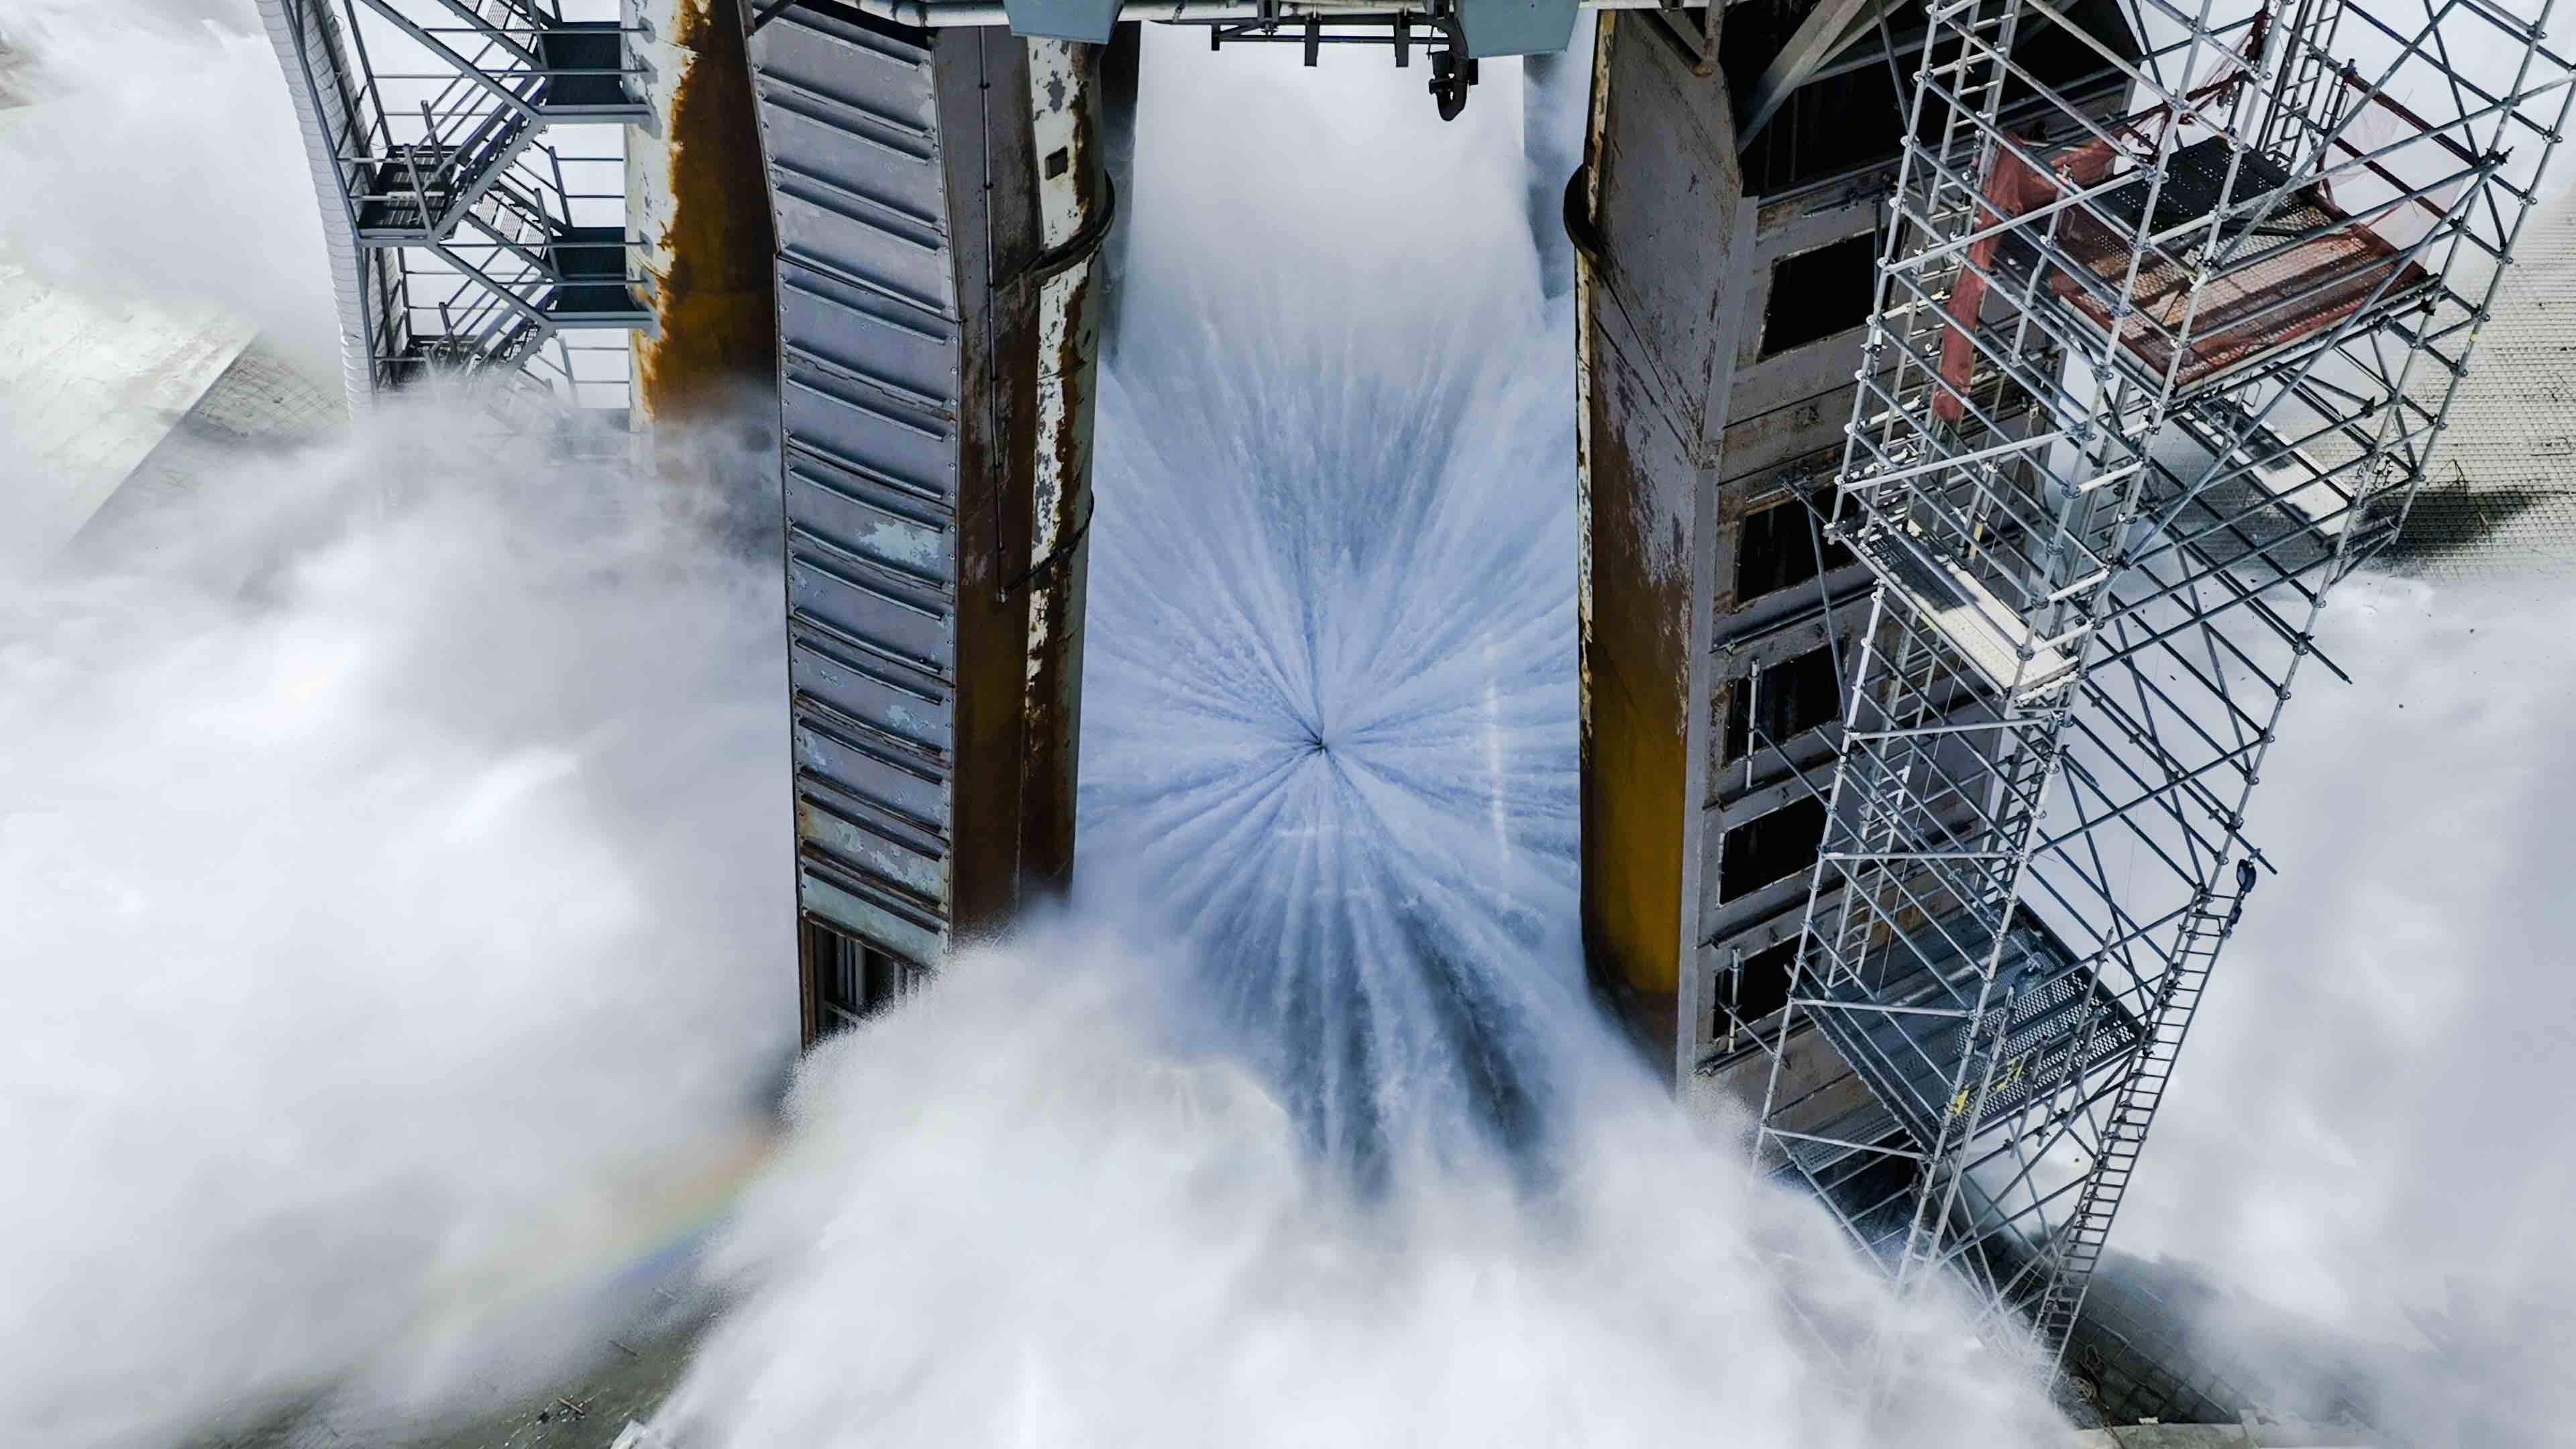 A top-down view of the first Water Deluge Test from the SpaceX Launch Tower in Starbase Texas.